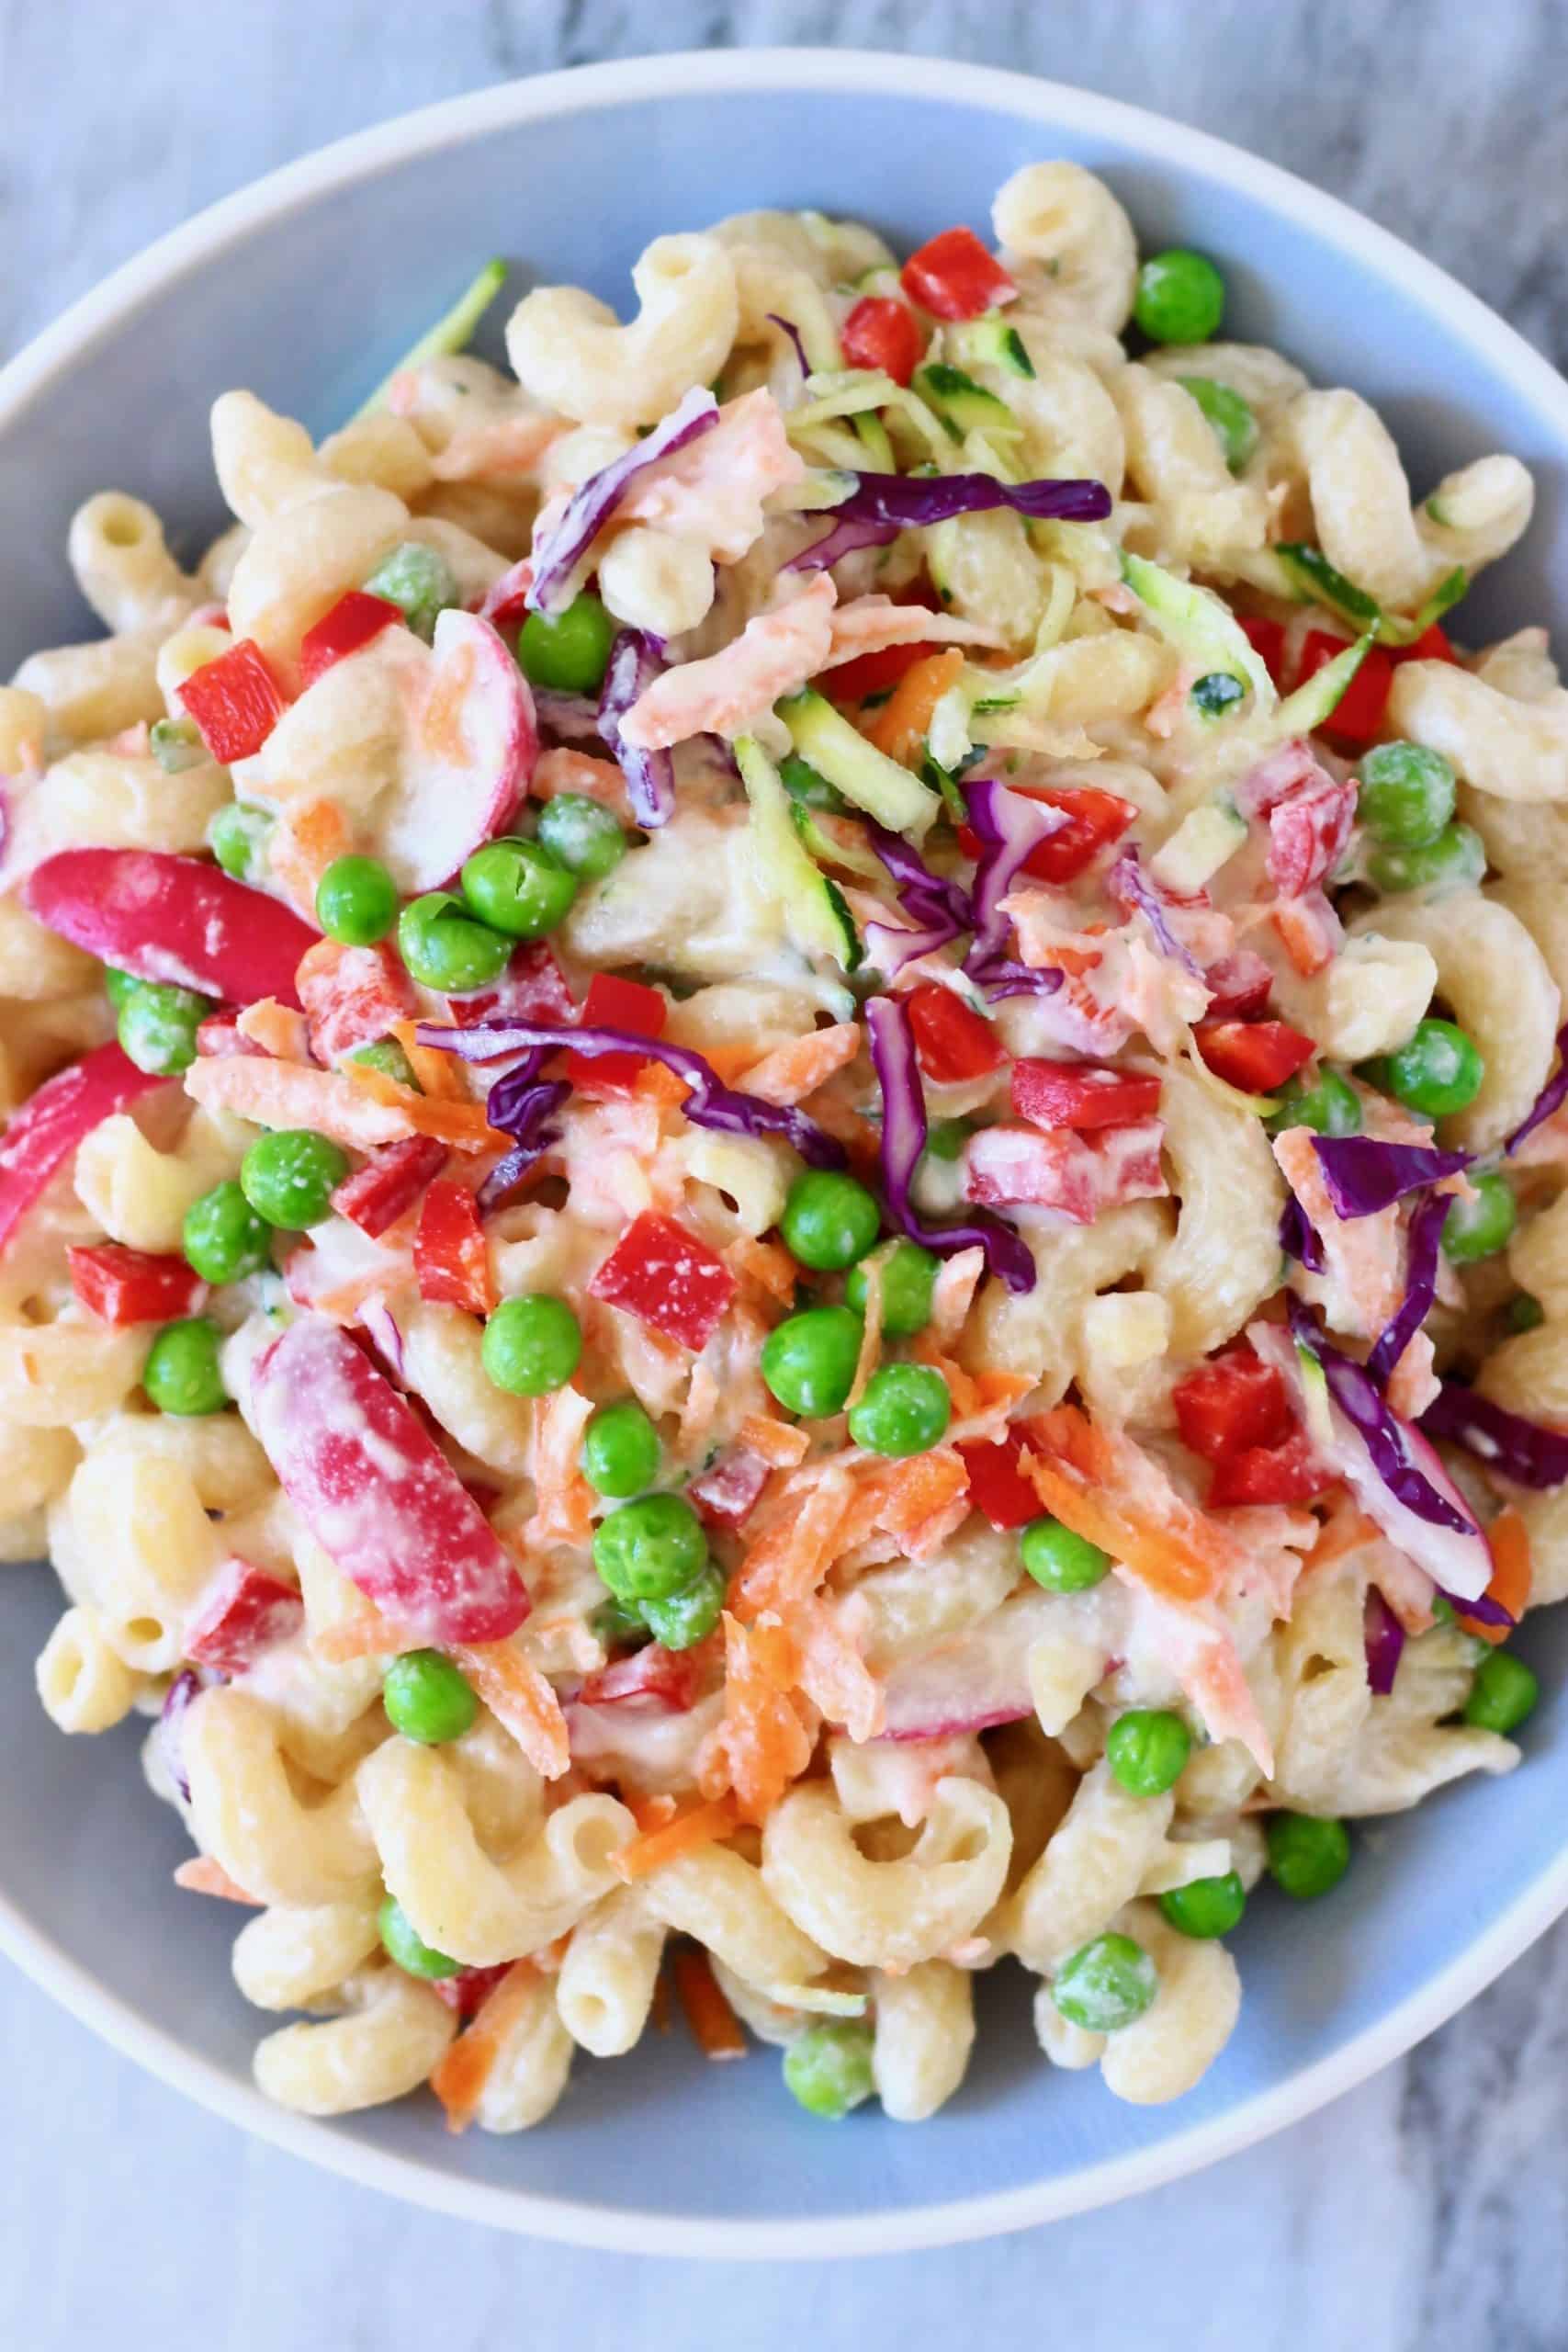 Pasta salad with green peas, shredded cabbage, radish and carrots in a mayonnaise dressing in a light blue bowl 